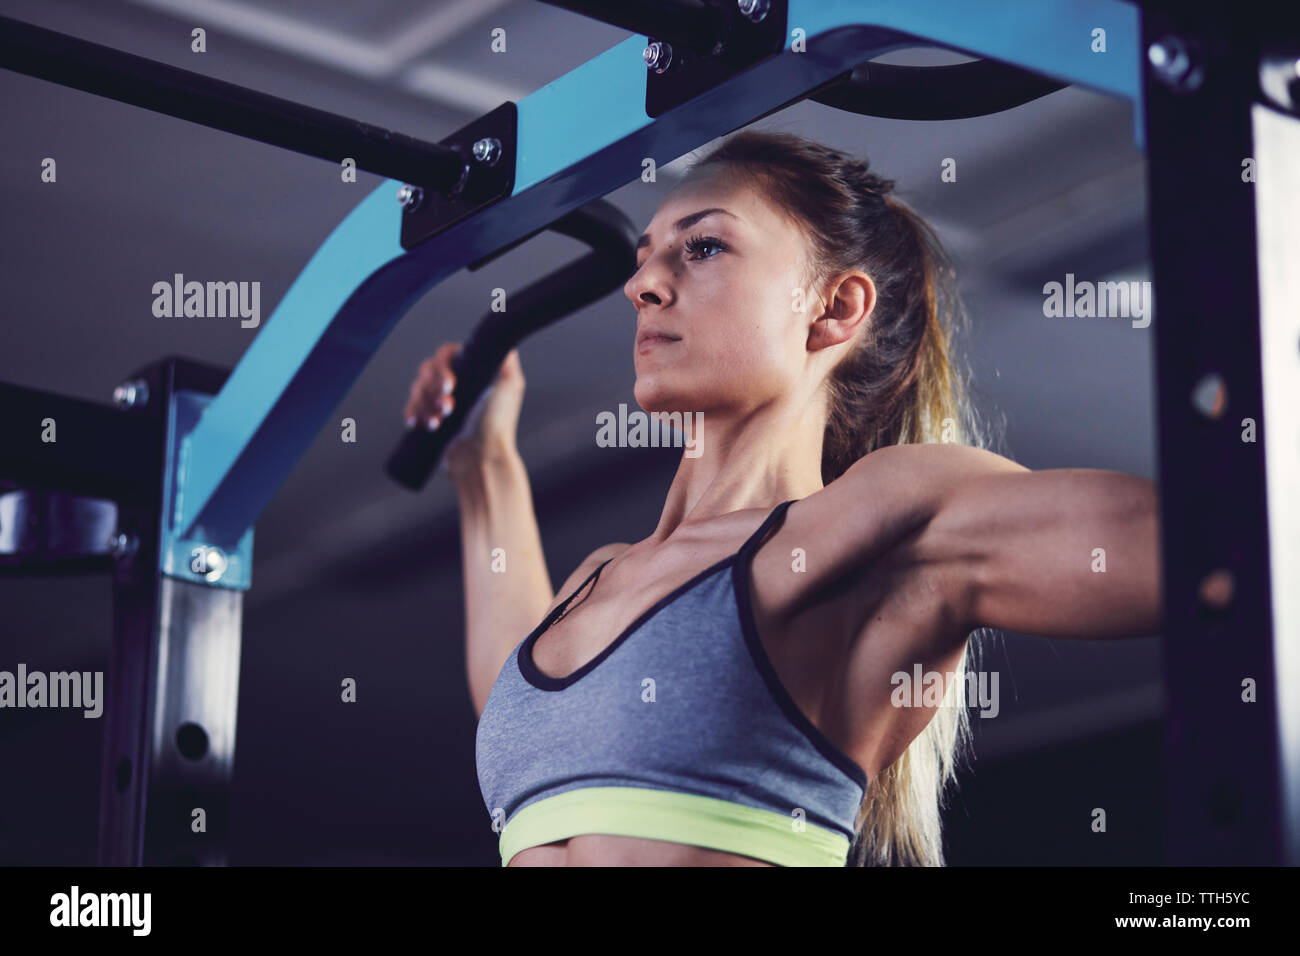 Front profile of young woman doing chin ups at fitness centre Stock Photo